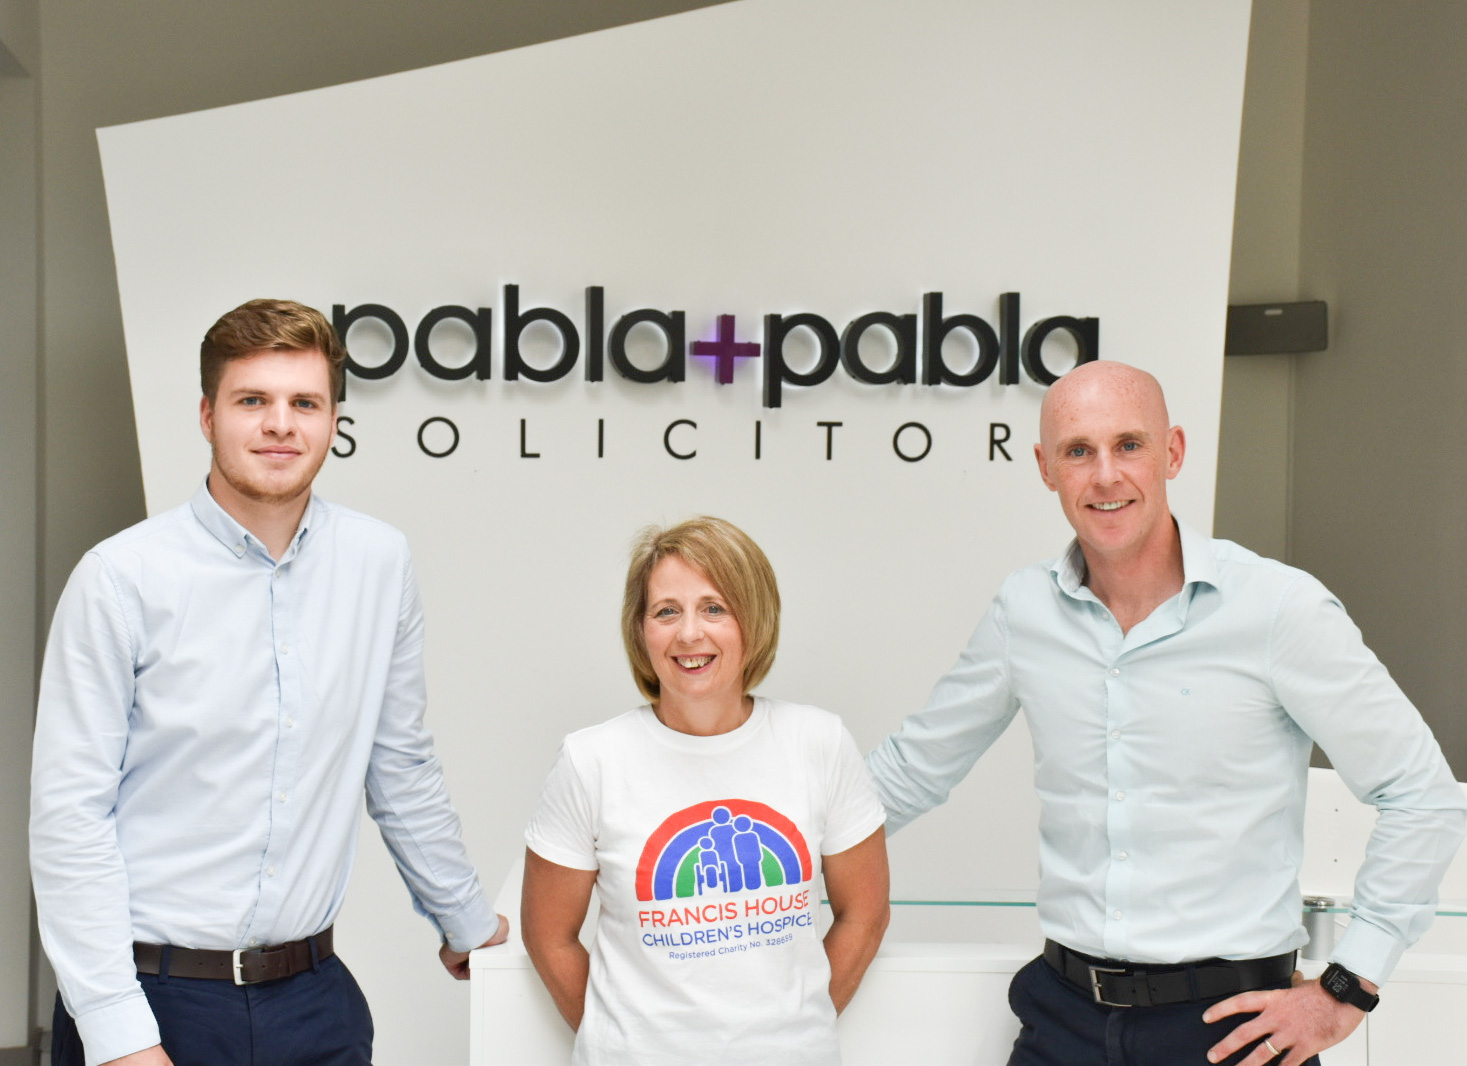 Pabla + Pabla Solicitors announces Francis House Children’s Hospice as its Charity of the Year